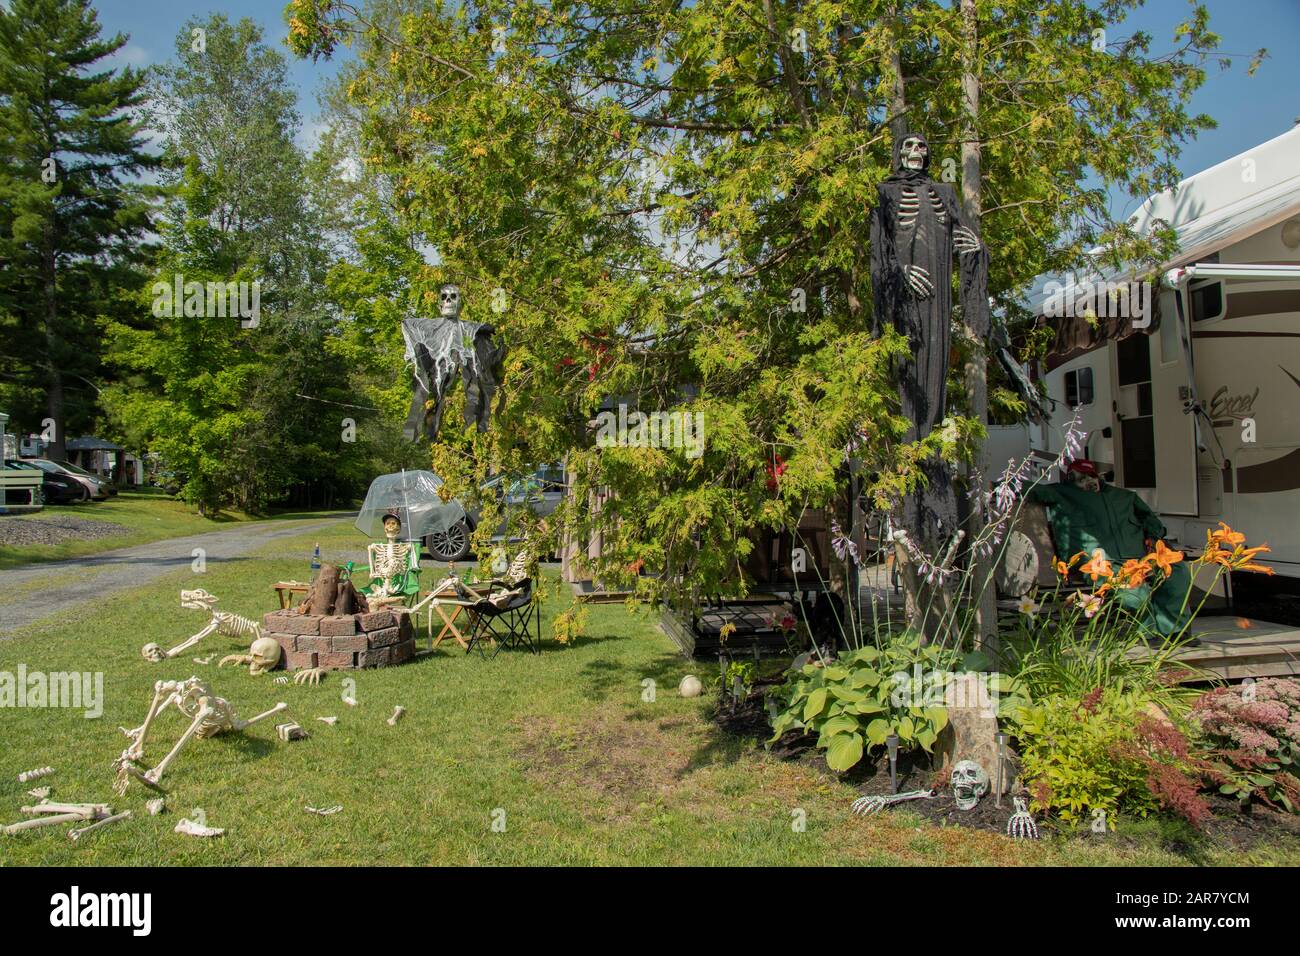 August 17, 2019 - West Brome, Quebec, Canada: Halloween outdoor decor beside a travel trailer on a campsite, Camping Vallée Bleue campground Stock Photo